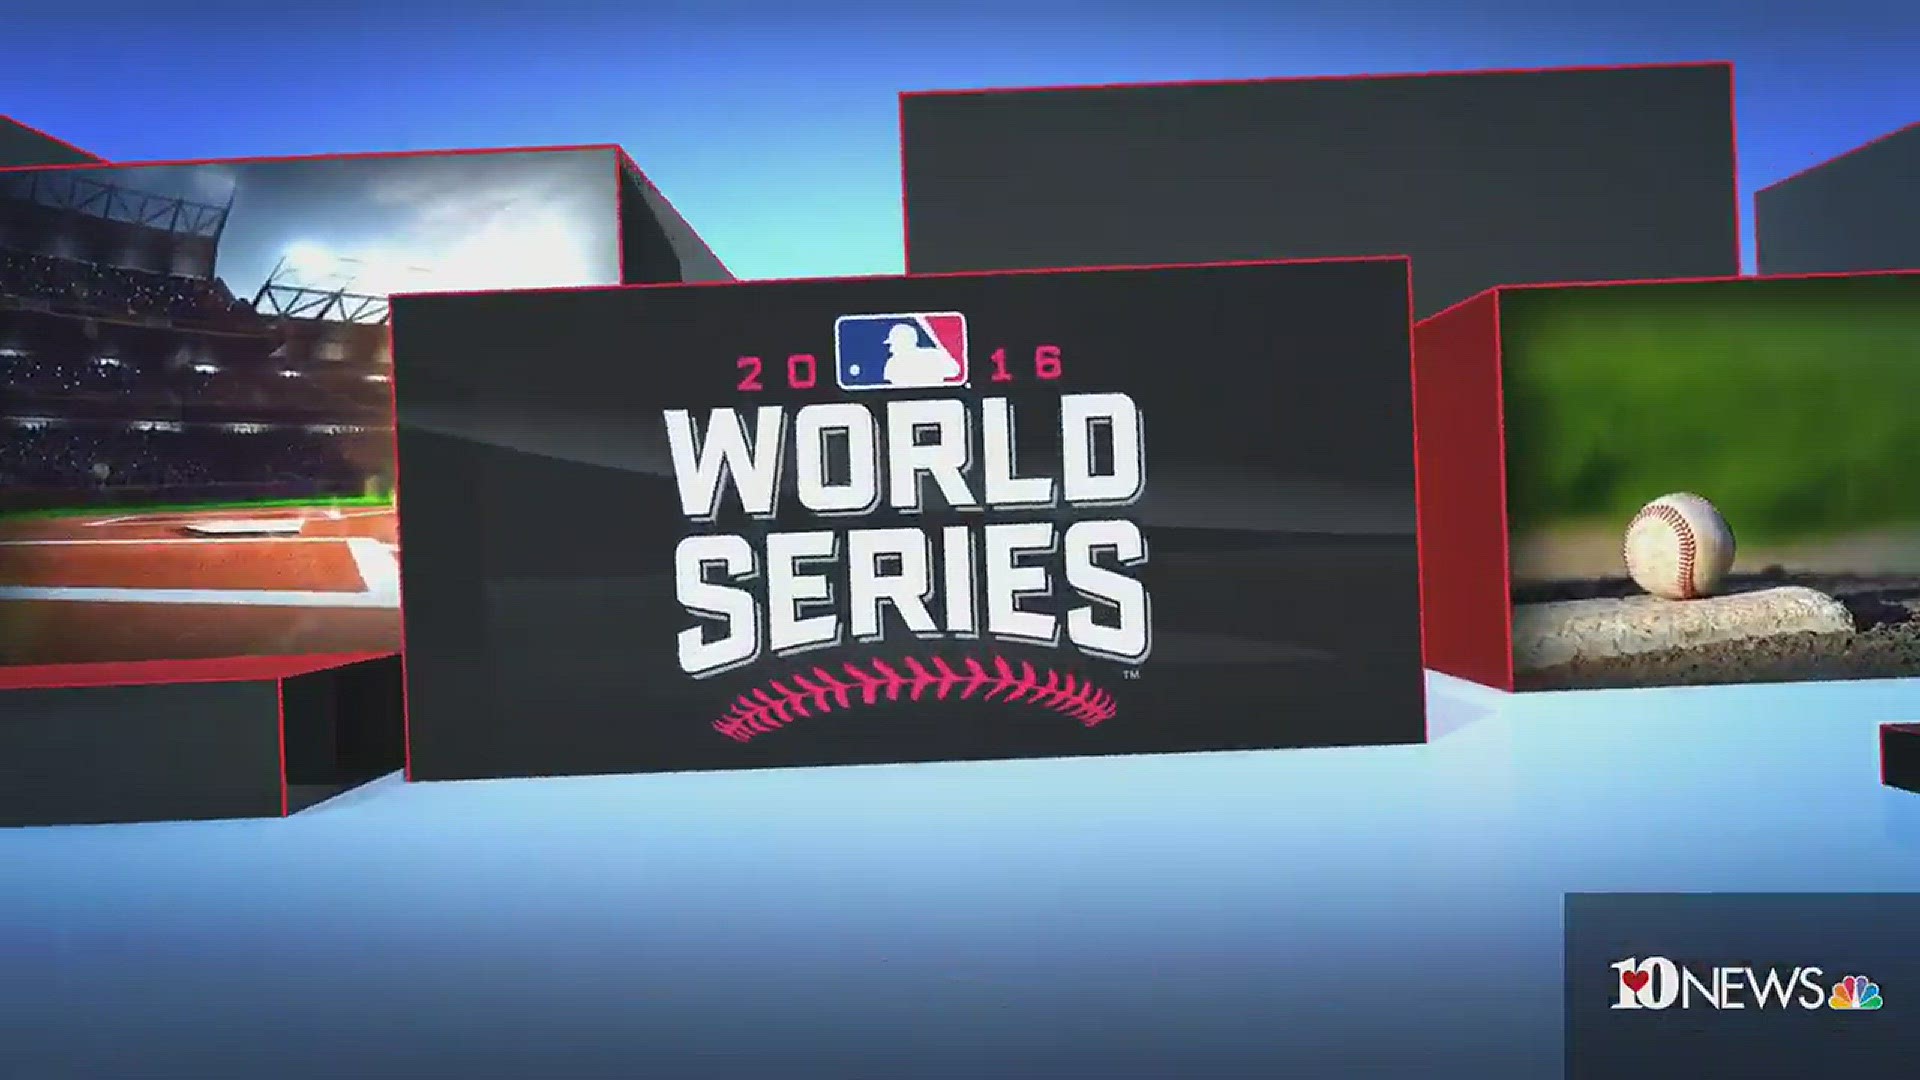 The Chicago Cubs host the Cleveland Indians in Game 5 of the 2016 World Series. Friday marks the first World Series game at Wrigley Field since Oct. 10, 1945.